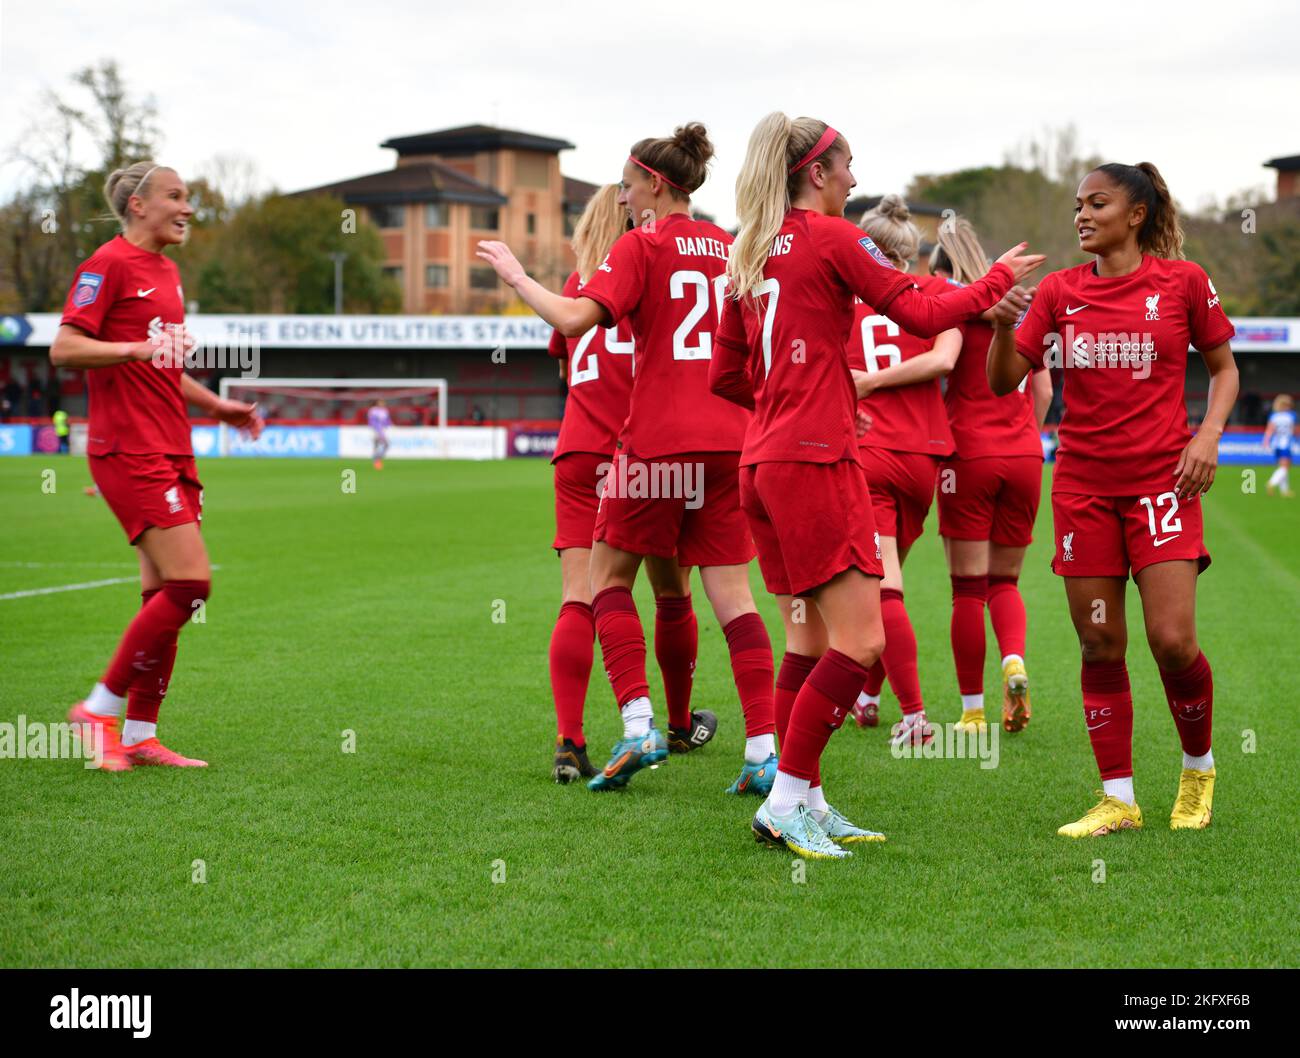 Crawley, UK. 20th Nov, 2022. Liverpool players celebrate scoring during the FA Women's Super League match between Brighton & Hove Albion Women and Liverpool Women at The People's Pension Stadium on November 20th 2022 in Crawley, United Kingdom. (Photo by Jeff Mood/phcimages.com) Credit: PHC Images/Alamy Live News Stock Photo